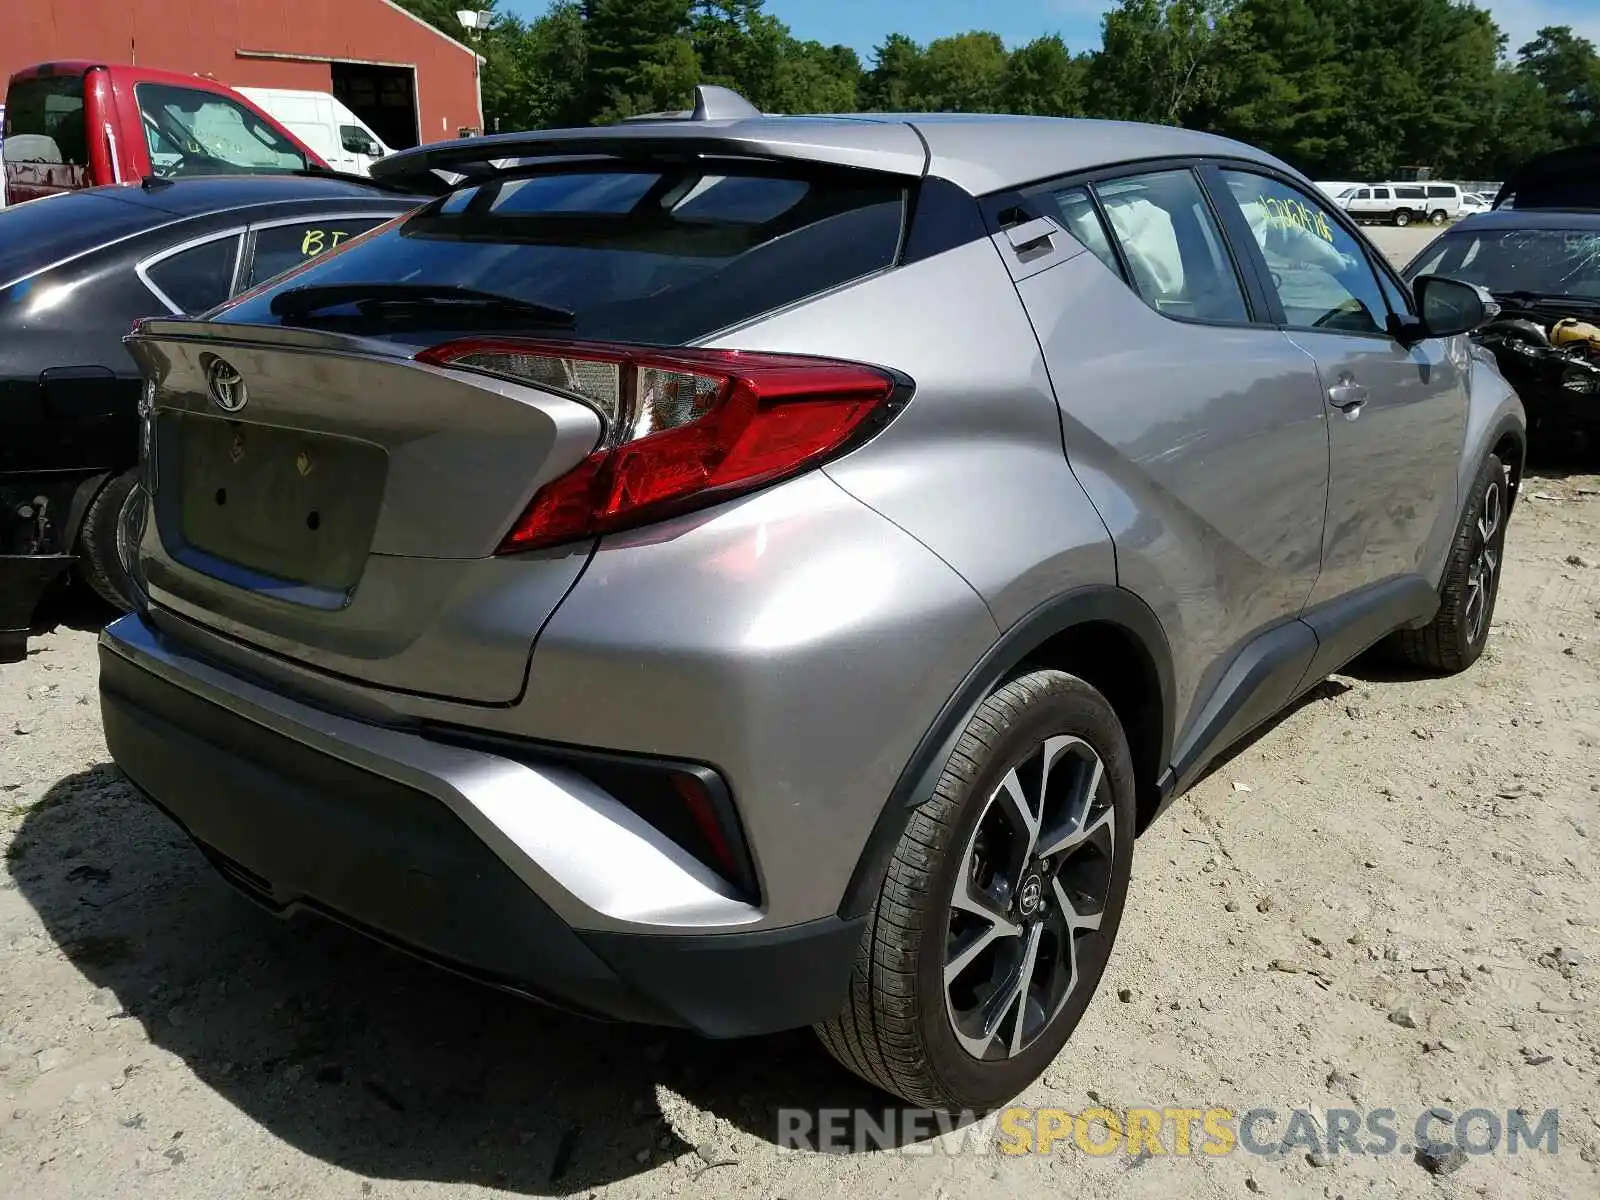 4 Photograph of a damaged car NMTKHMBXXKR069781 TOYOTA C-HR 2019